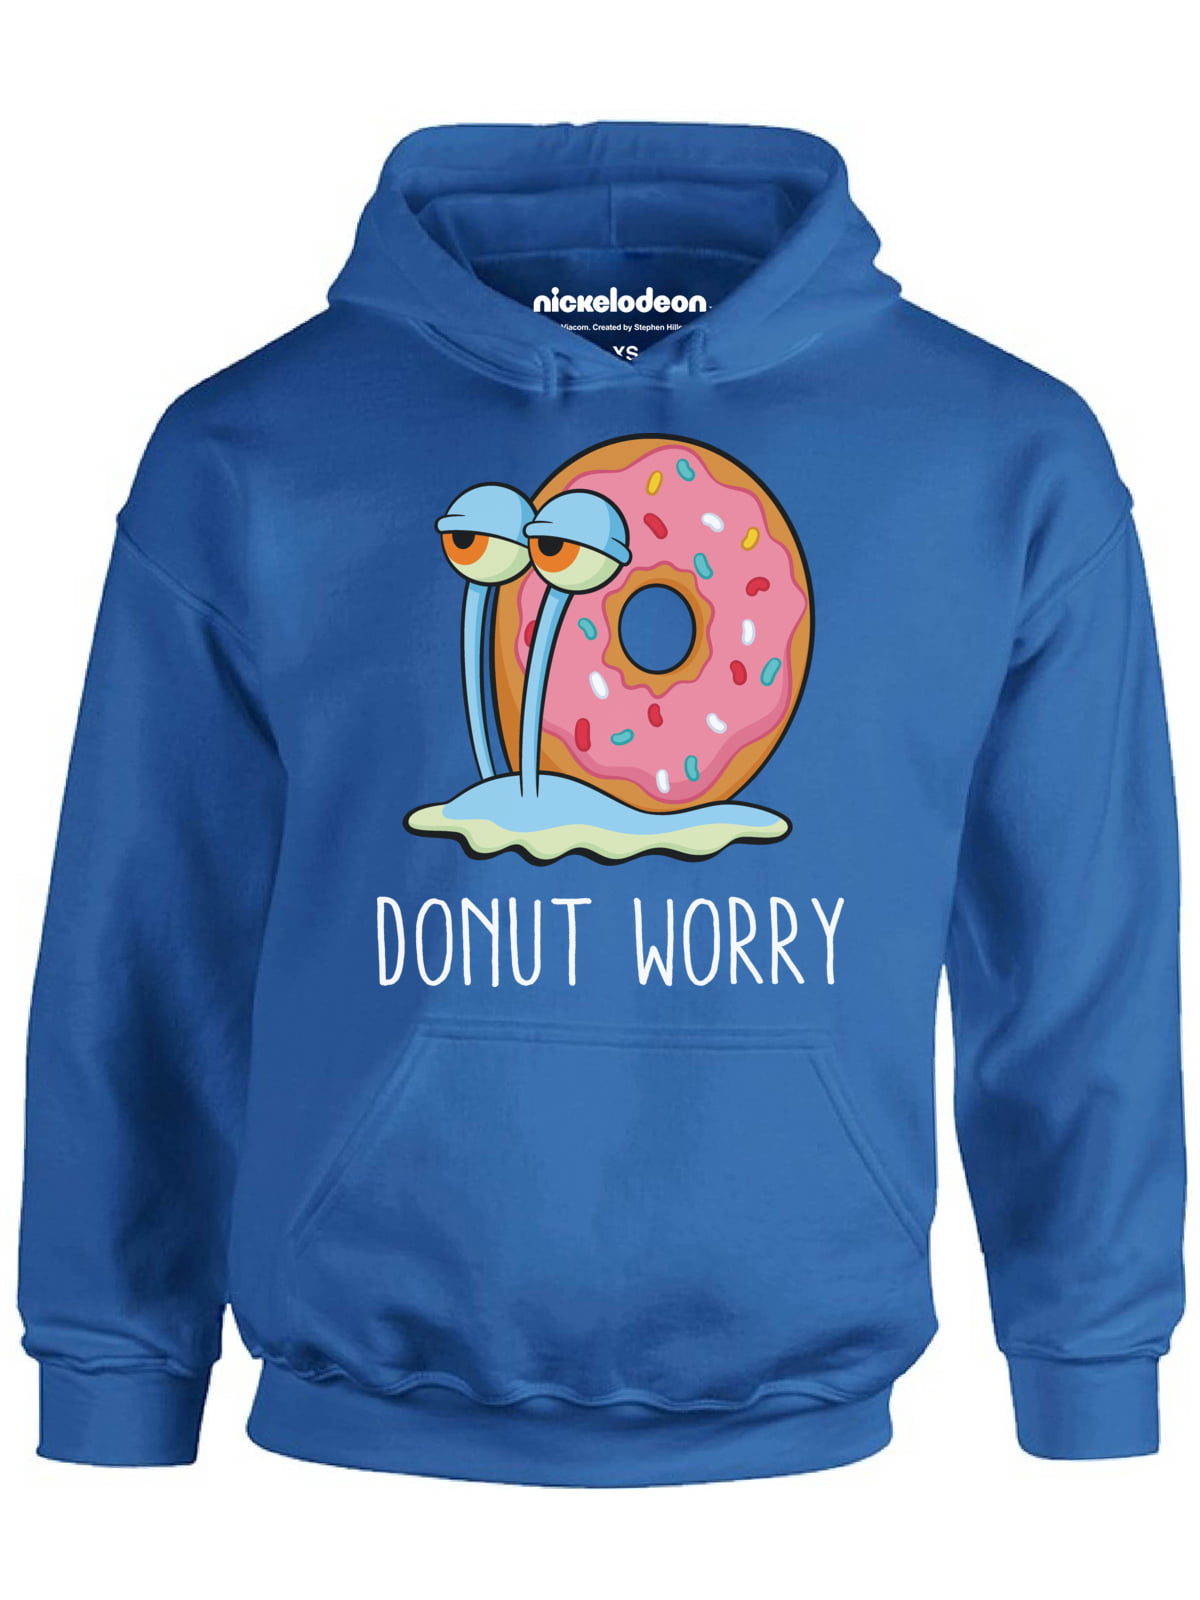 Donut Worry be Happy Funny Donut Cakes Awesome Gift Women Sweatshirt tee